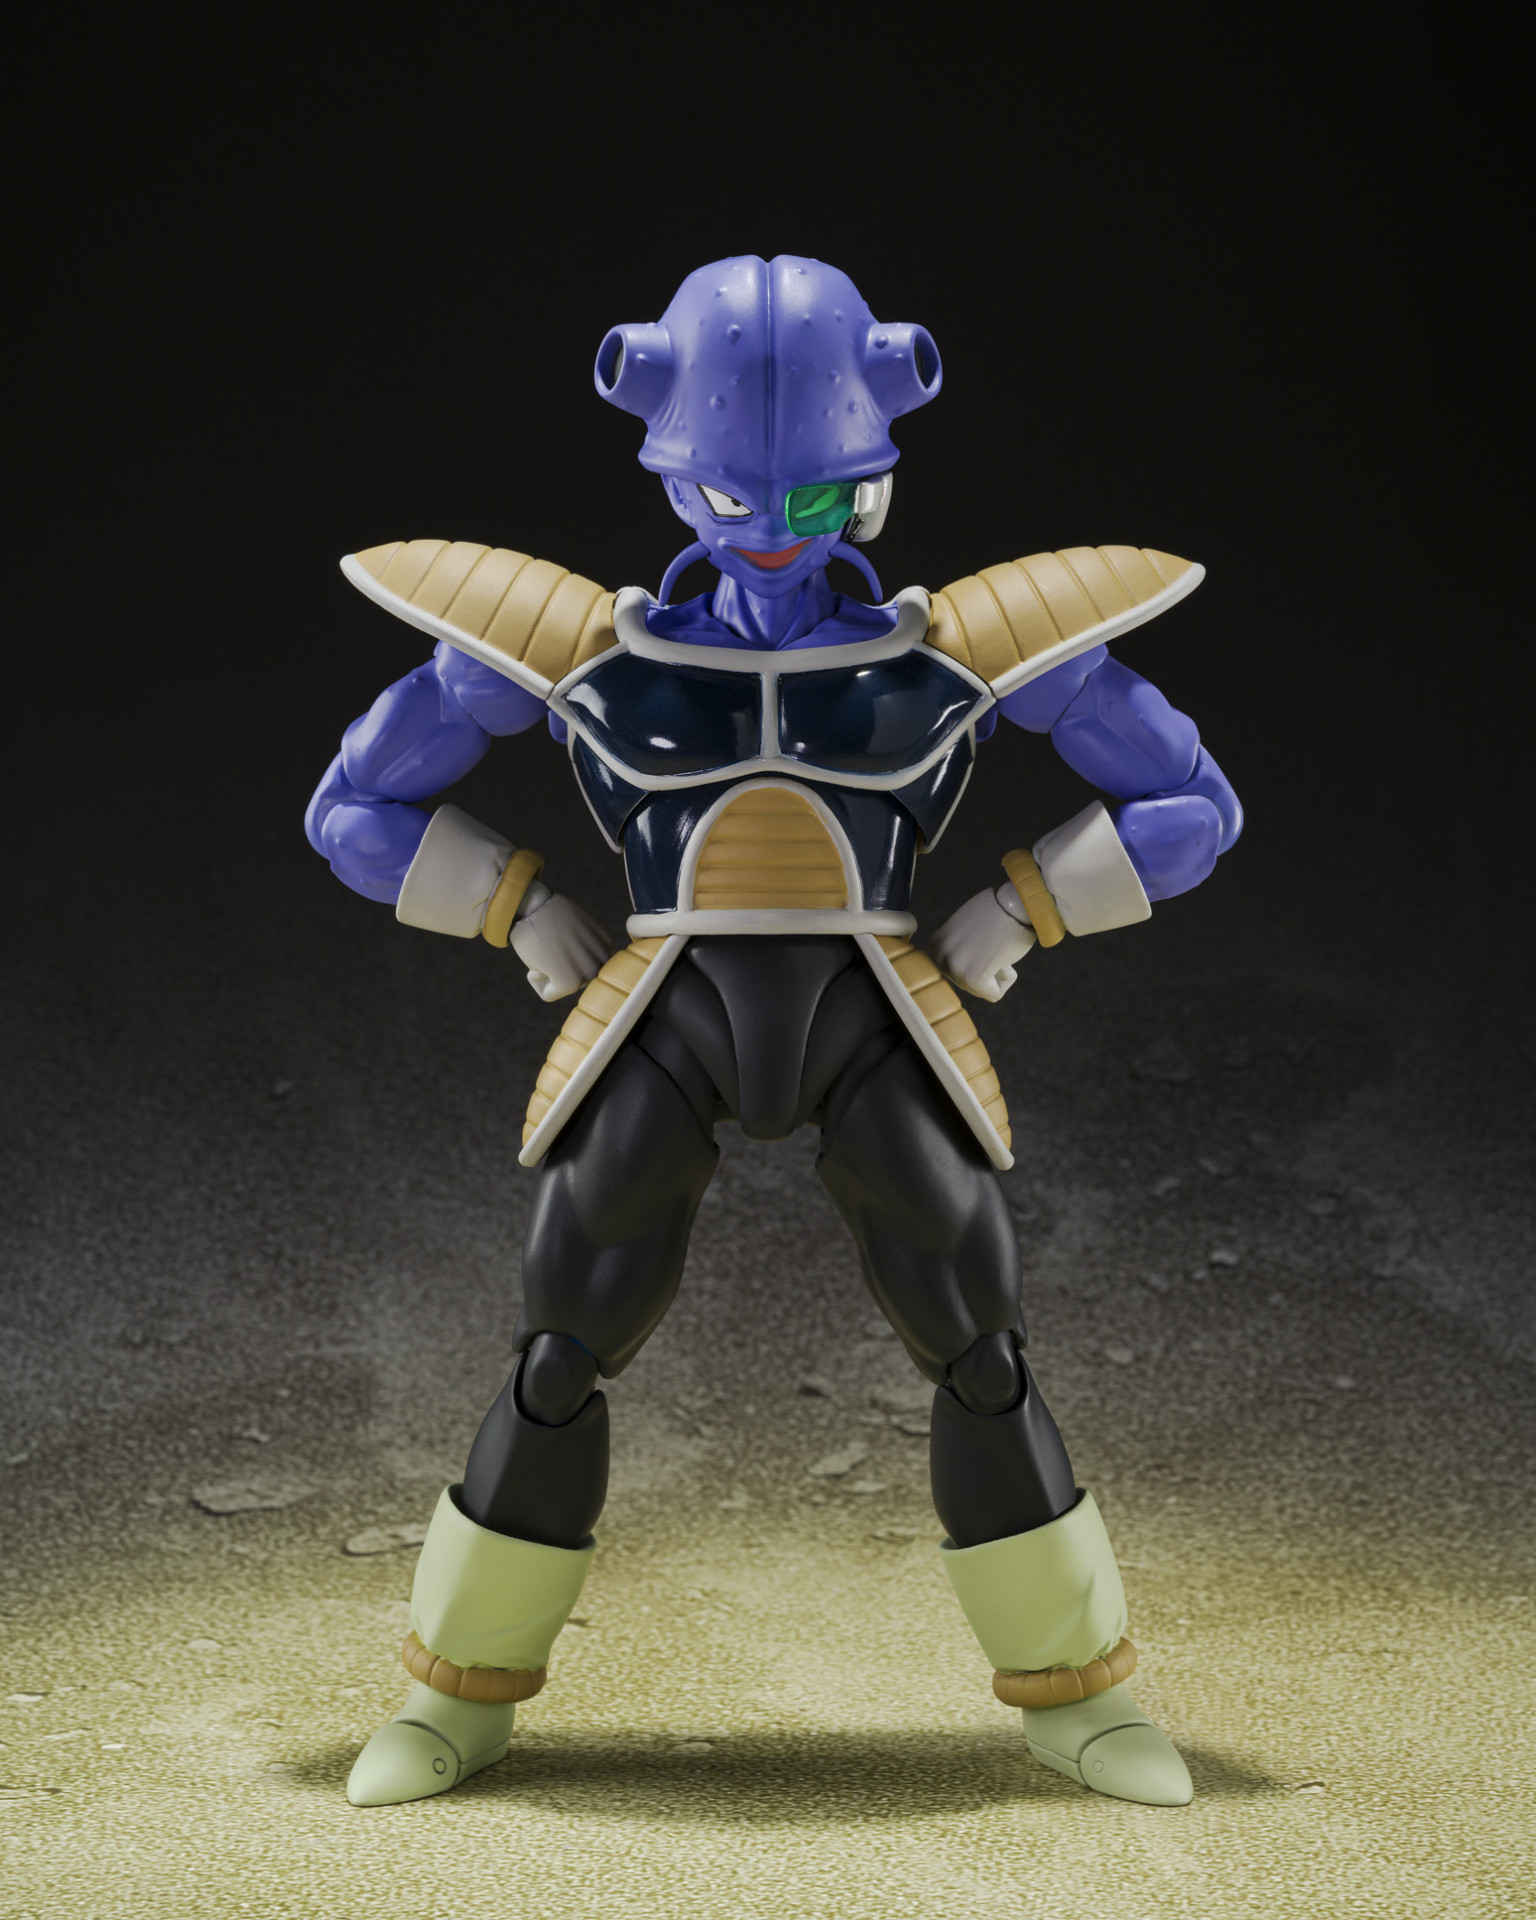 DRAGON BALL Z FIGURE HG - ANDROID COMPLETE SET